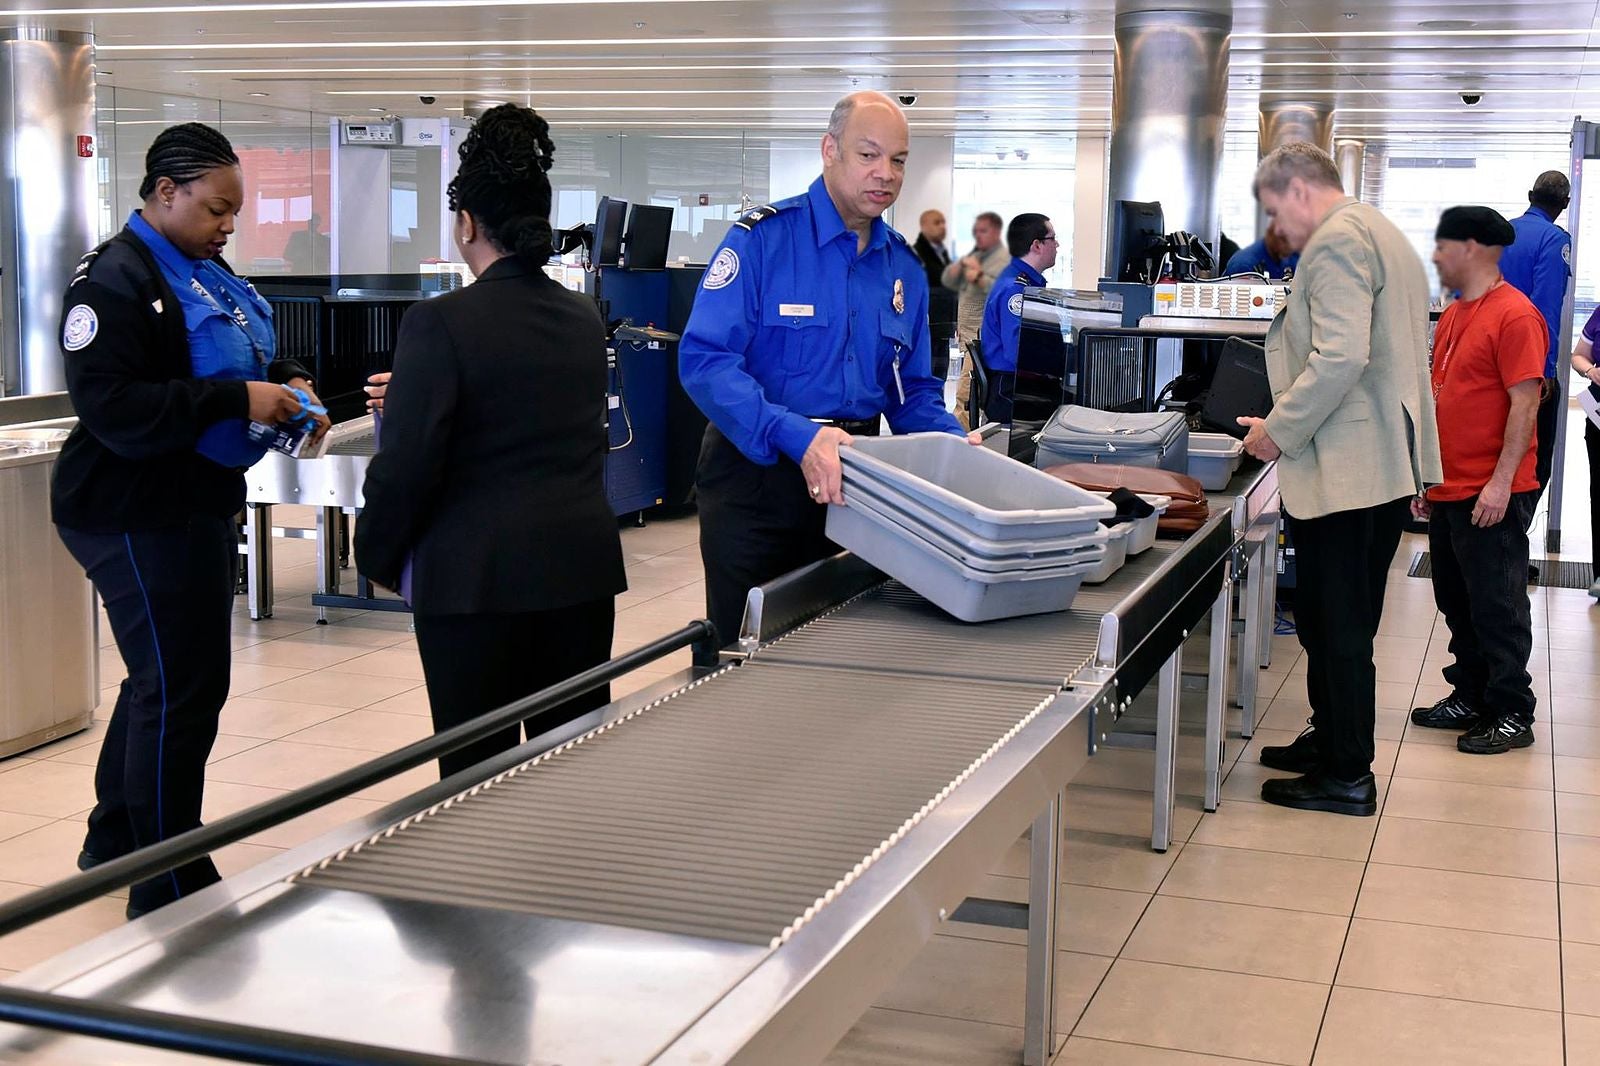 Passing airport security fast tips